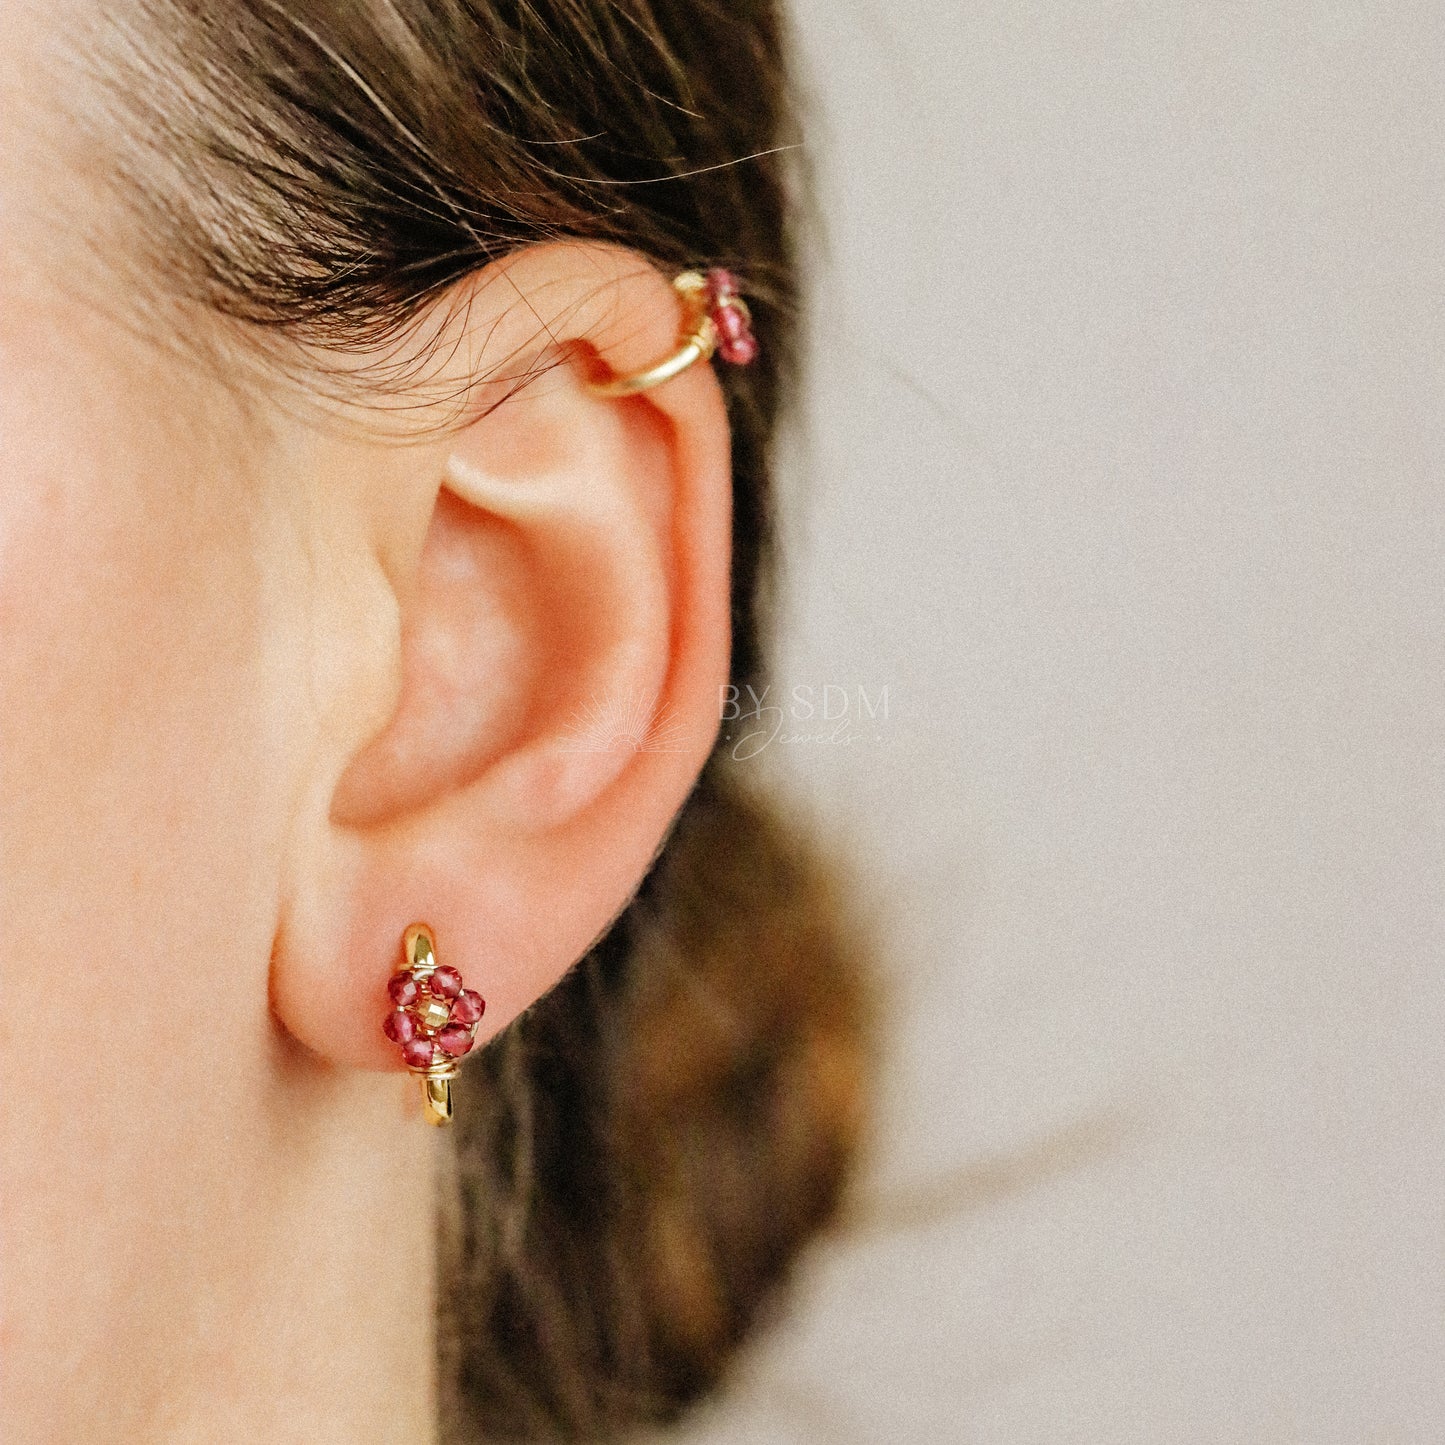 Oval Hoop Earrings with Fuxia Flowers • Gold Sterling Silver 925 • BYSDMJEWELS